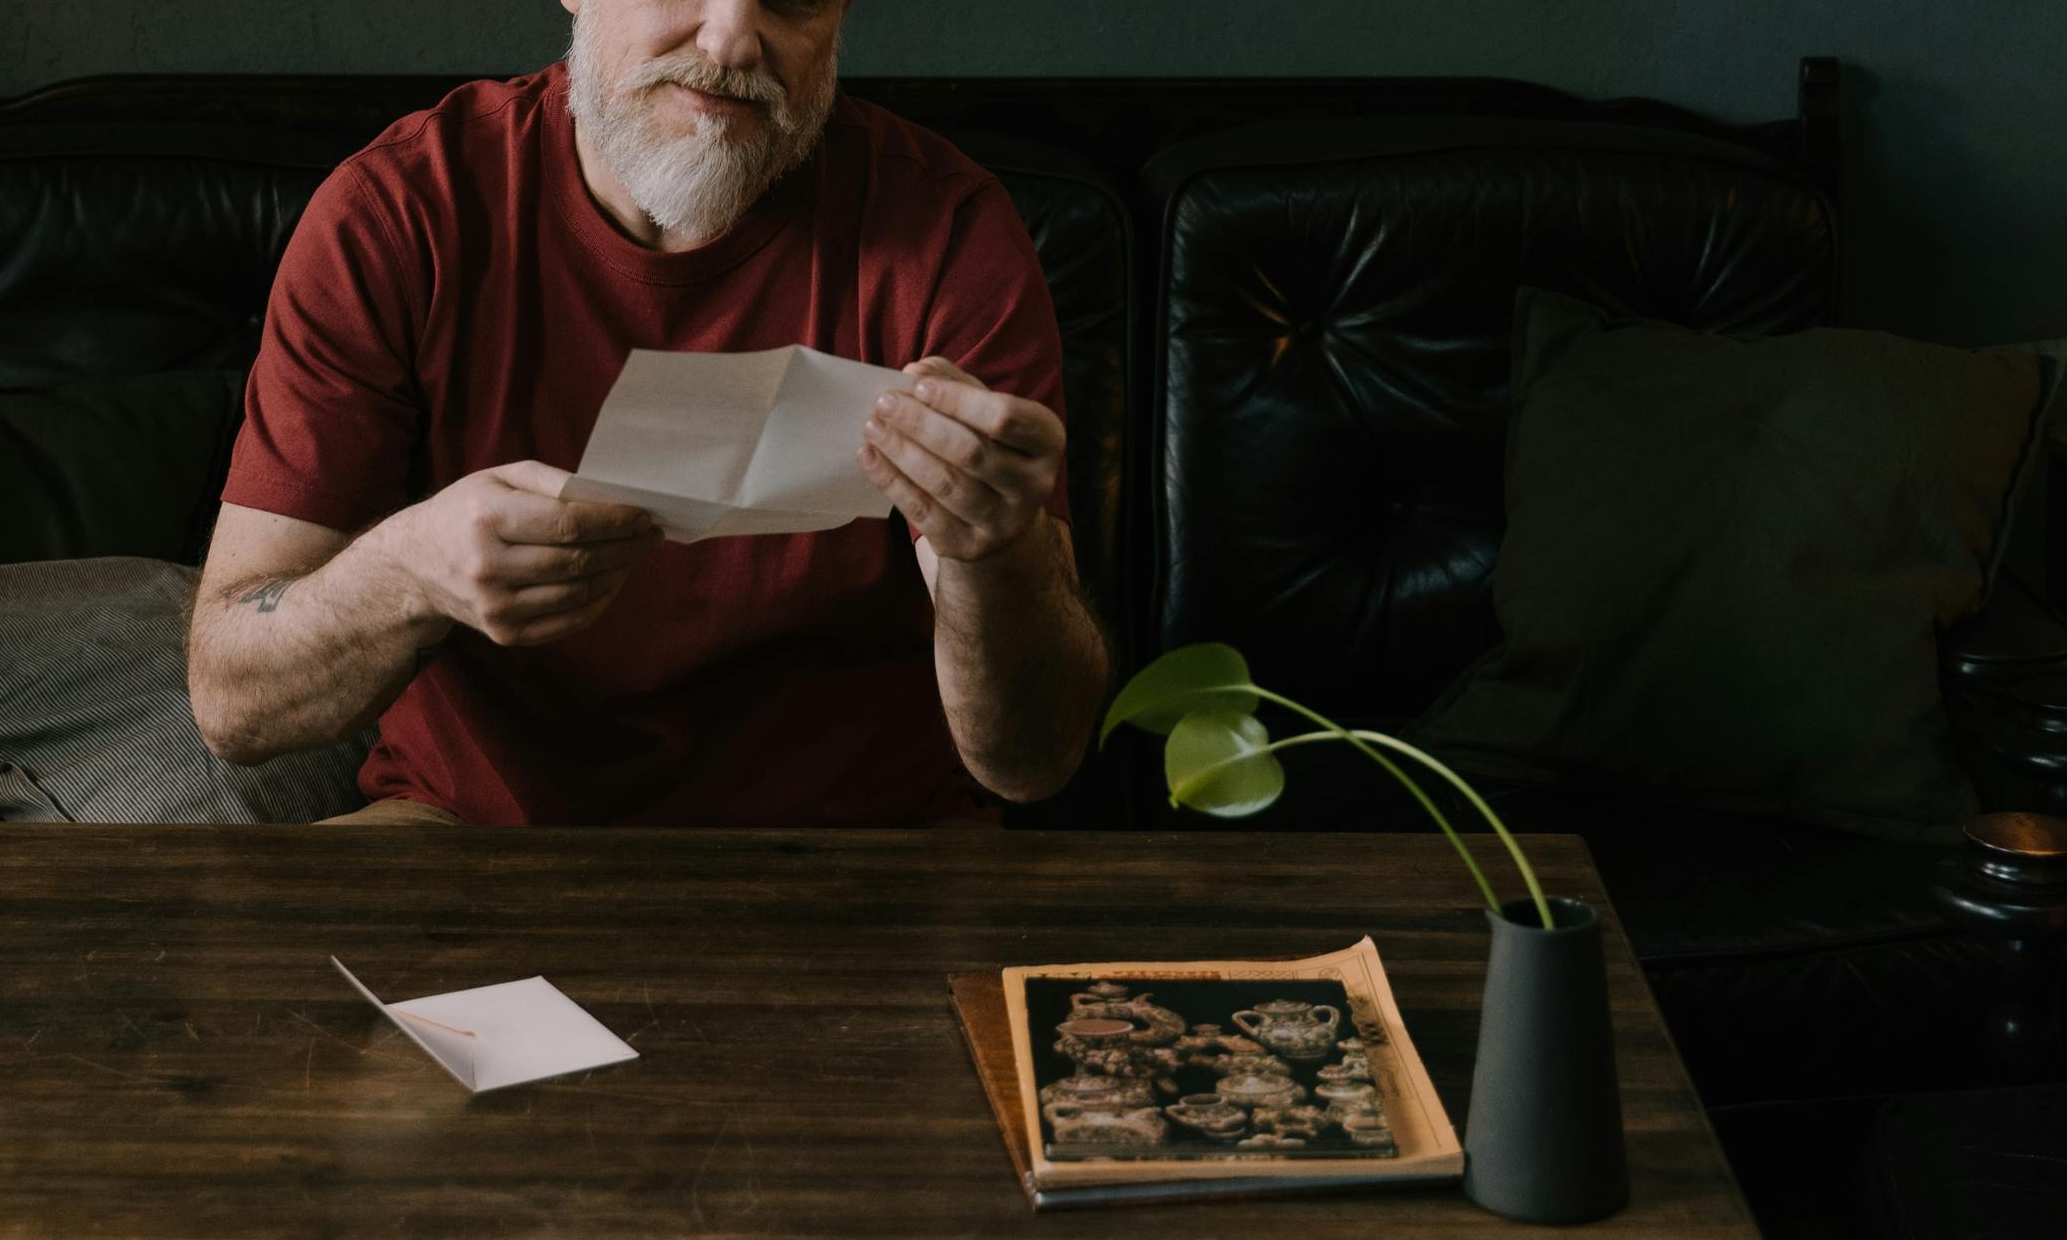 Mike reads Hans and Greta's letter inviting him to visit them in the Netherlands | Source: Pexels